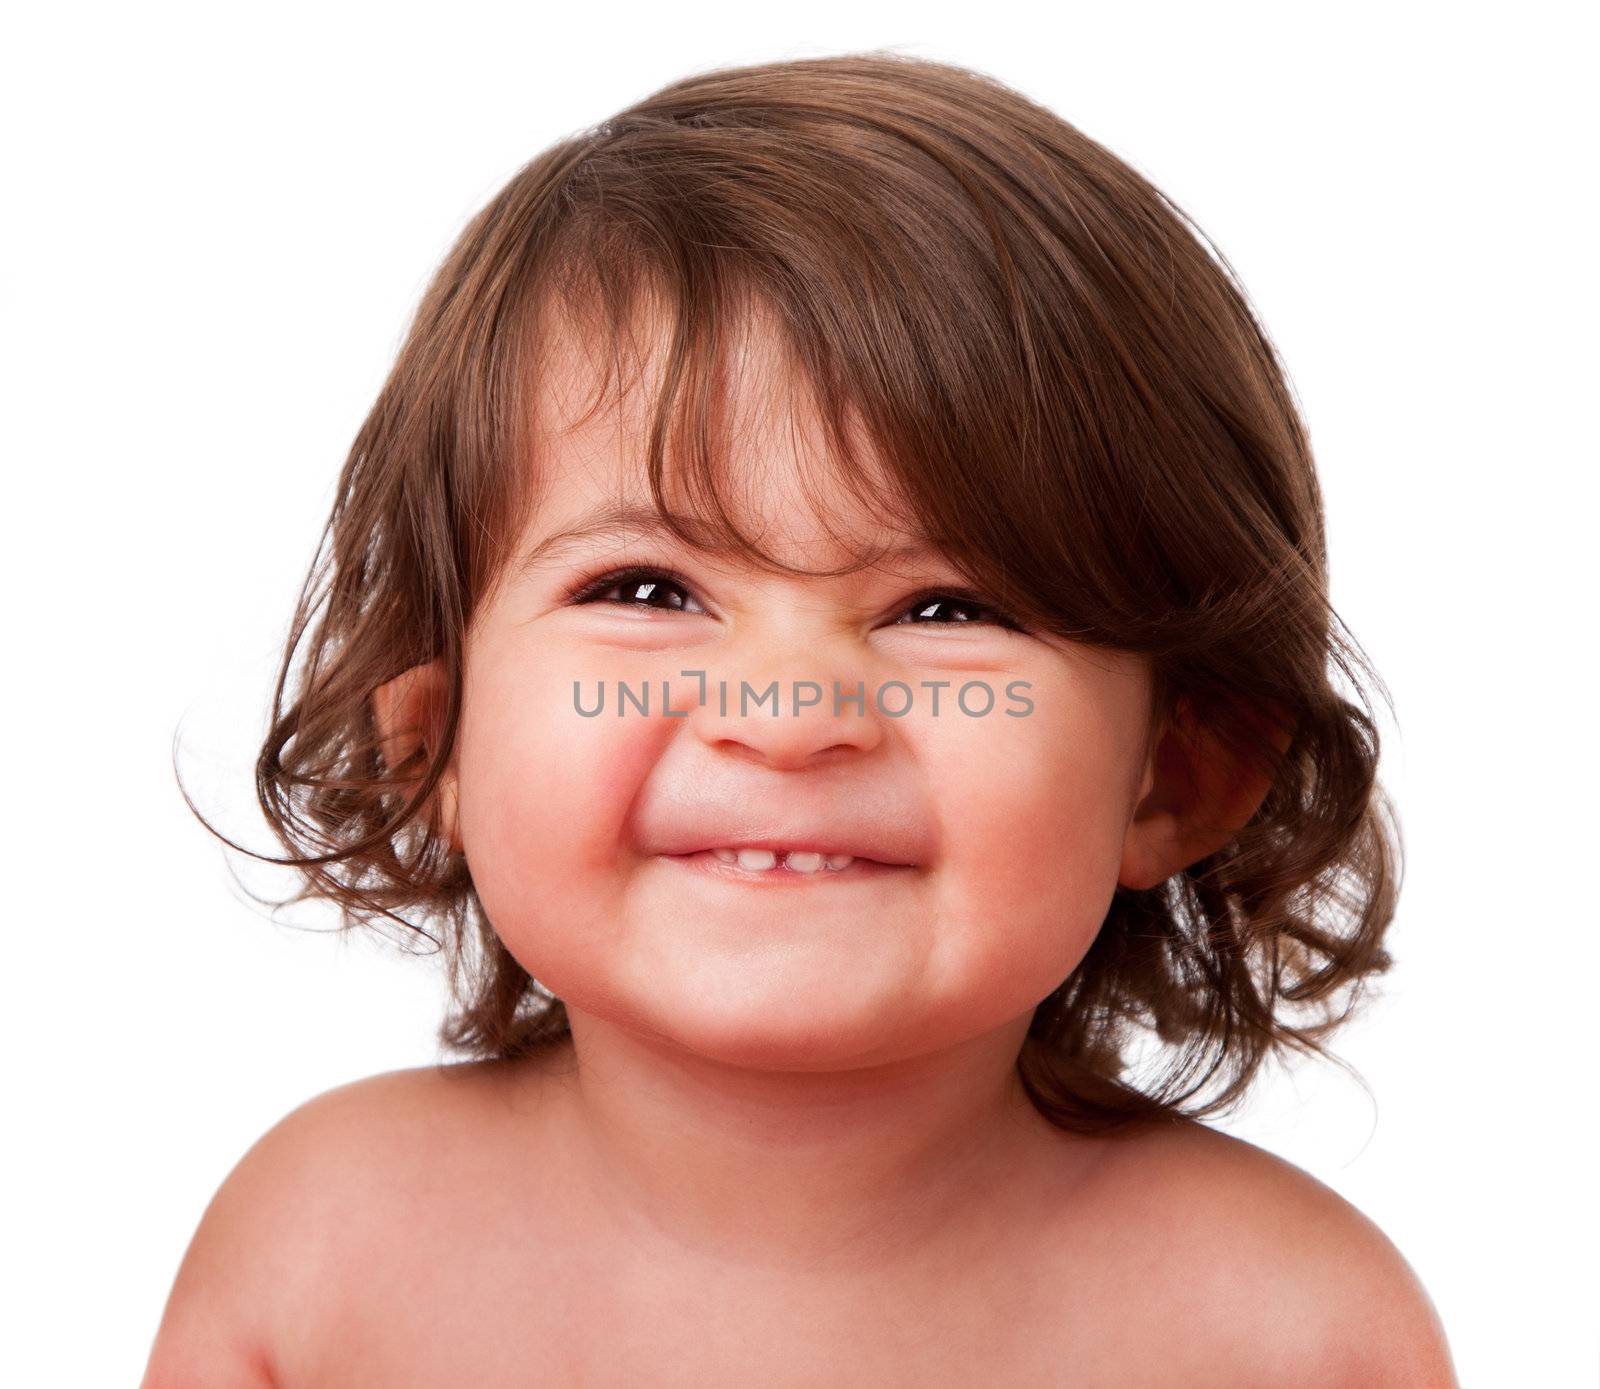 Cute happy funny baby toddler face smiling showing teeth, isolated.